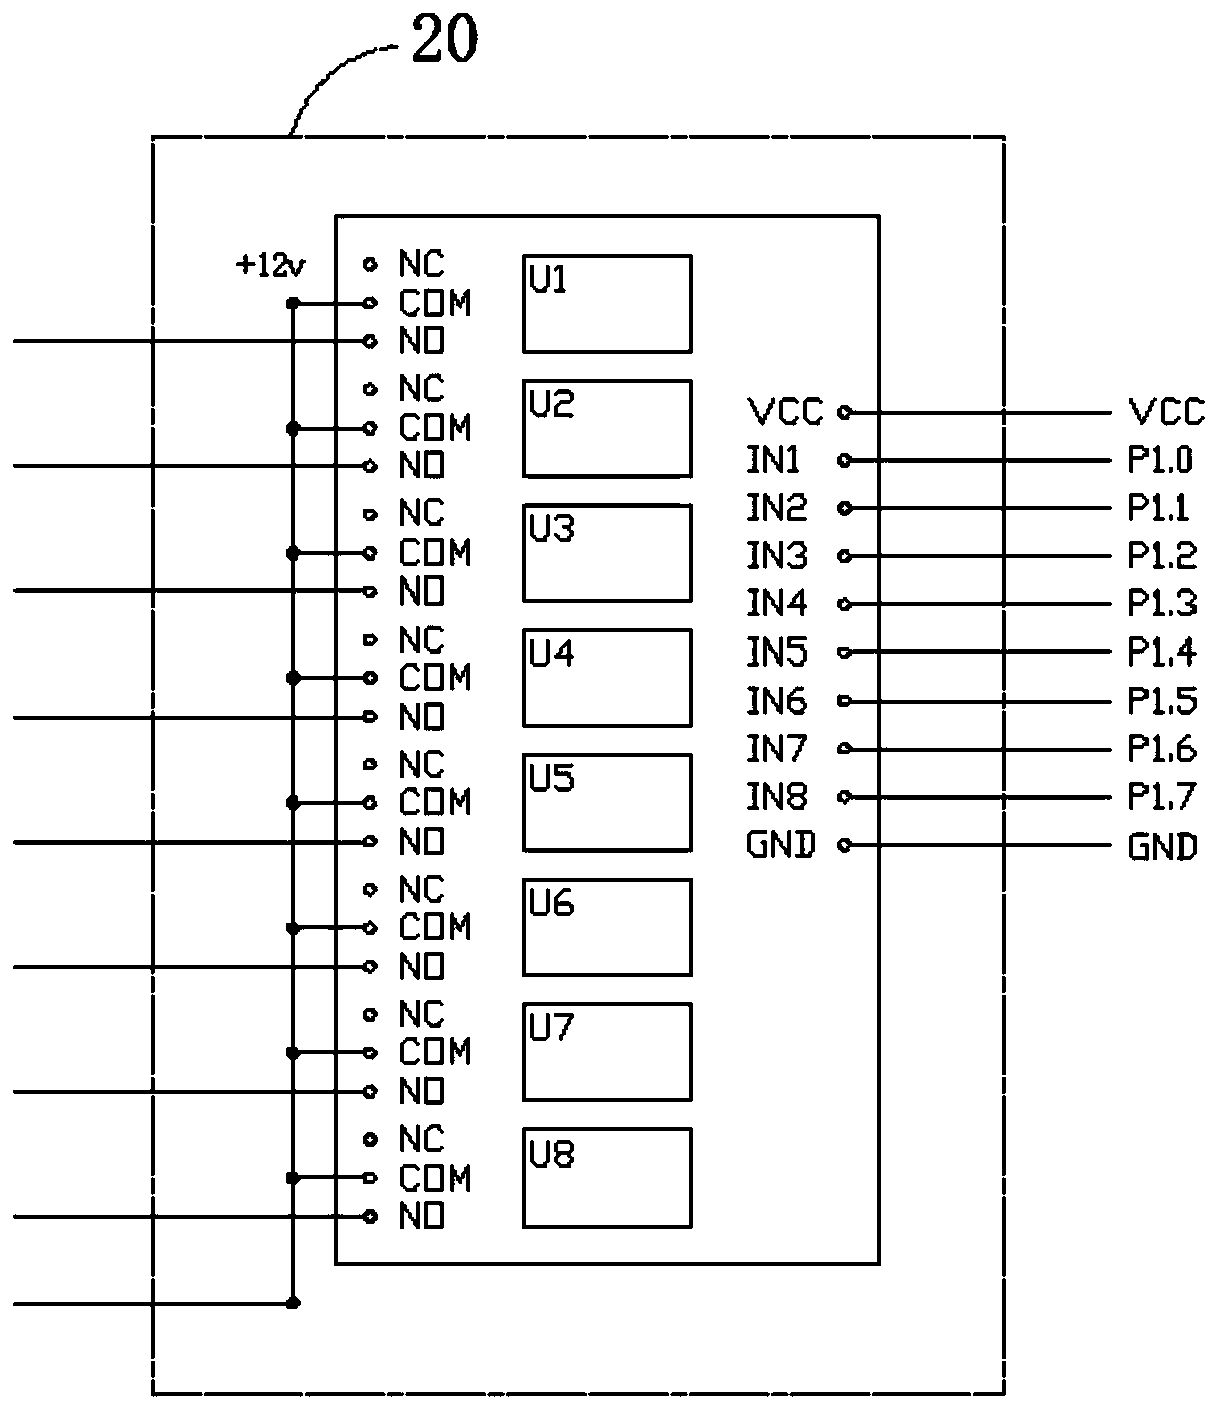 Hybrid electric vehicle energy flow demonstration controller system